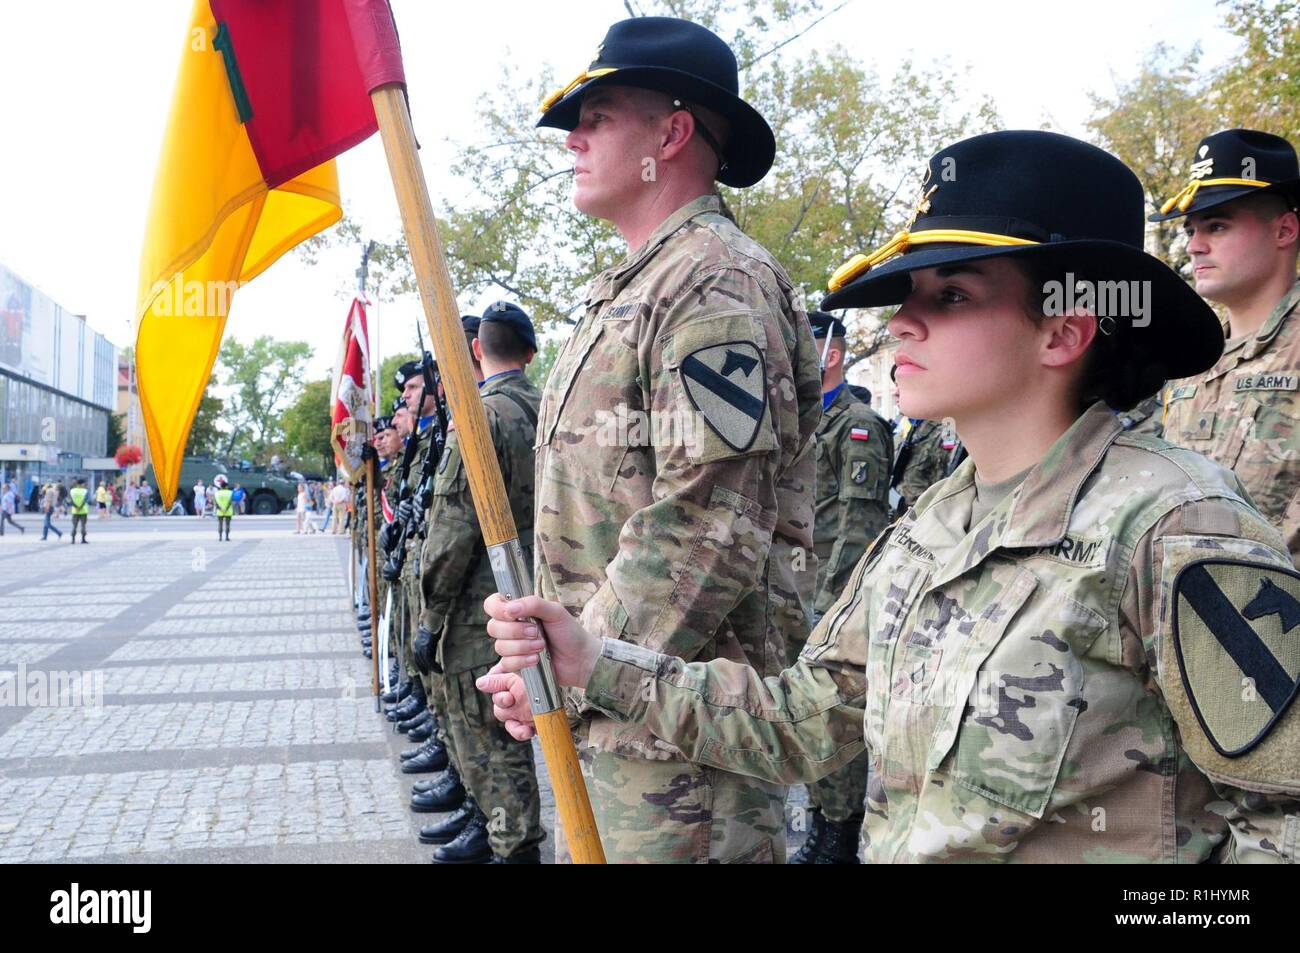 Soldiers assigned to Headquarters and Headquarters Company, 1st Armored Brigade Combat Team, 1st Cavalry Division, stand in formation alongside 11th 'Lubuska' Armoured Cavalry Division soldiers during a ceremony to observe the Black Division Day in Zielona Gora, Poland, Sept. 21, 2018. The 11th 'Lubuska' ACD, also known as The Black Division, honors this military holiday as a commemoration of the battle of Vienna when its commander, King John III Sobieski, led forces to defeat the Turkish army of the Ottoman Empire in September 1683. Stock Photo